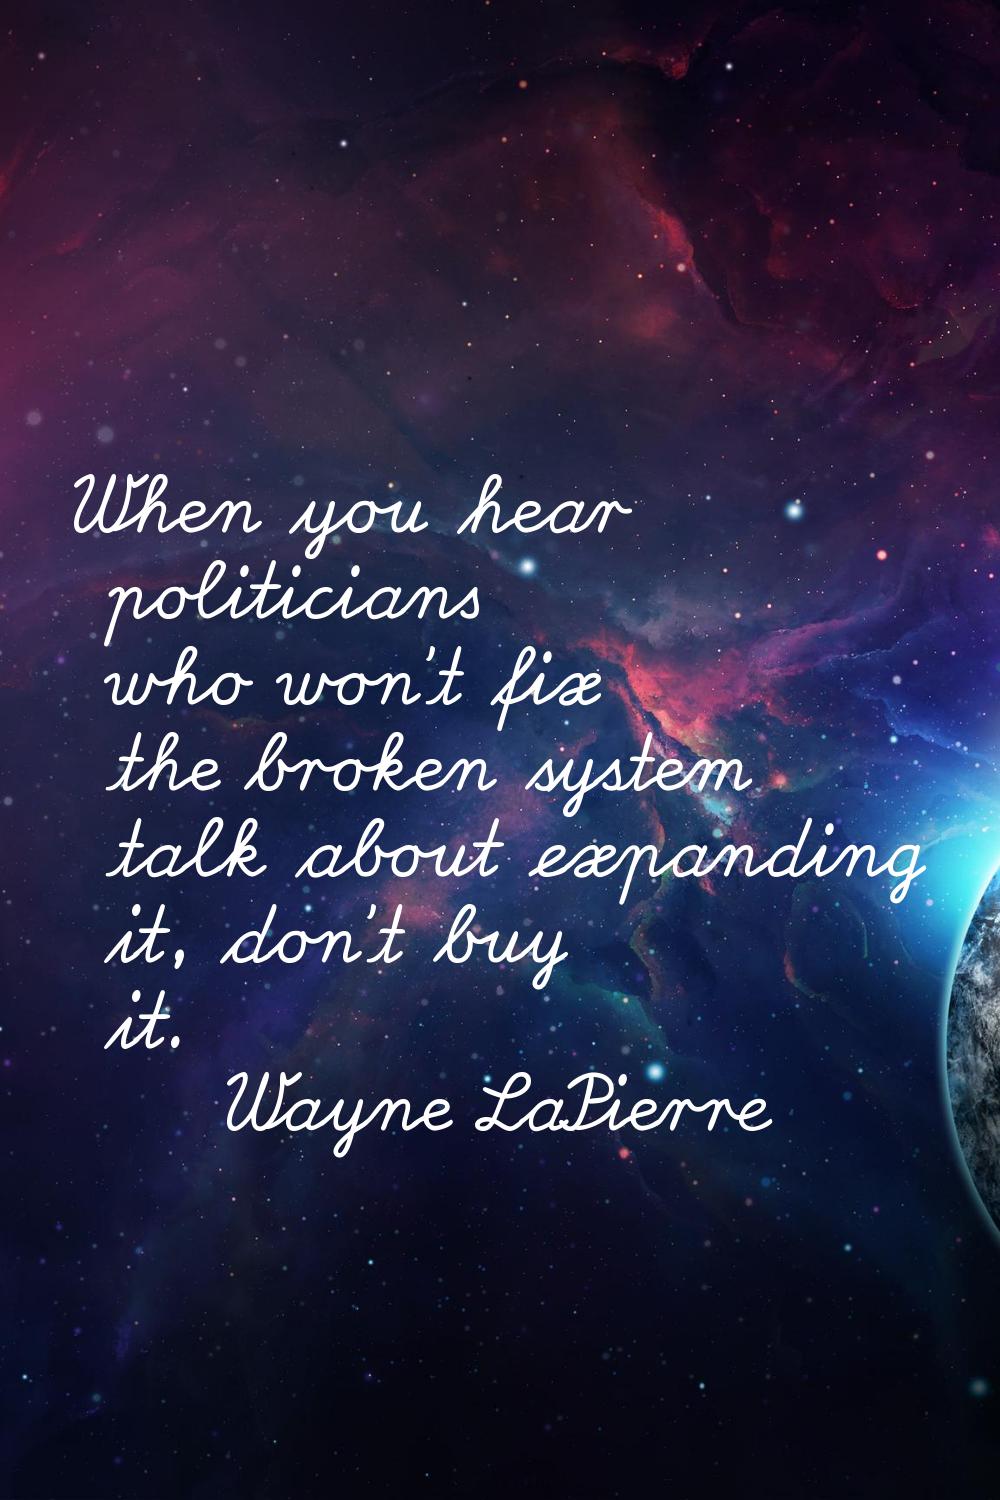 When you hear politicians who won't fix the broken system talk about expanding it, don't buy it.